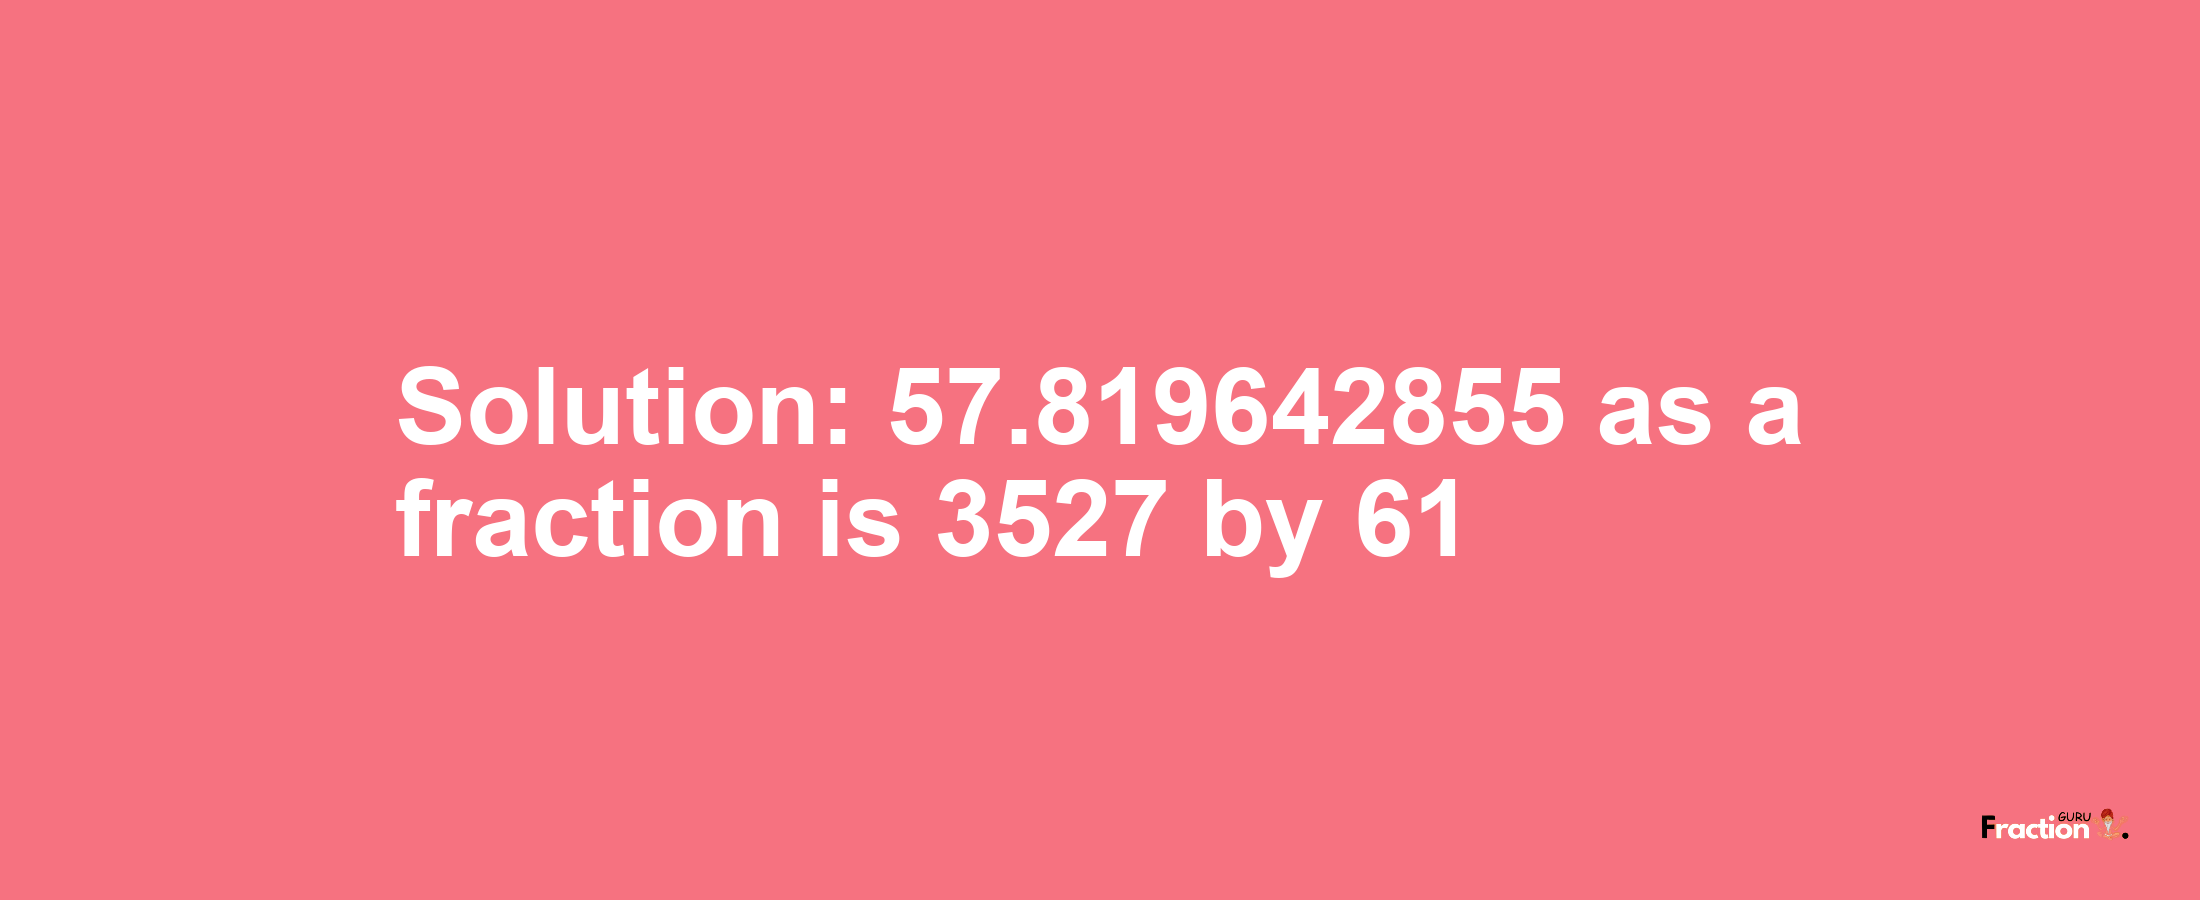 Solution:57.819642855 as a fraction is 3527/61